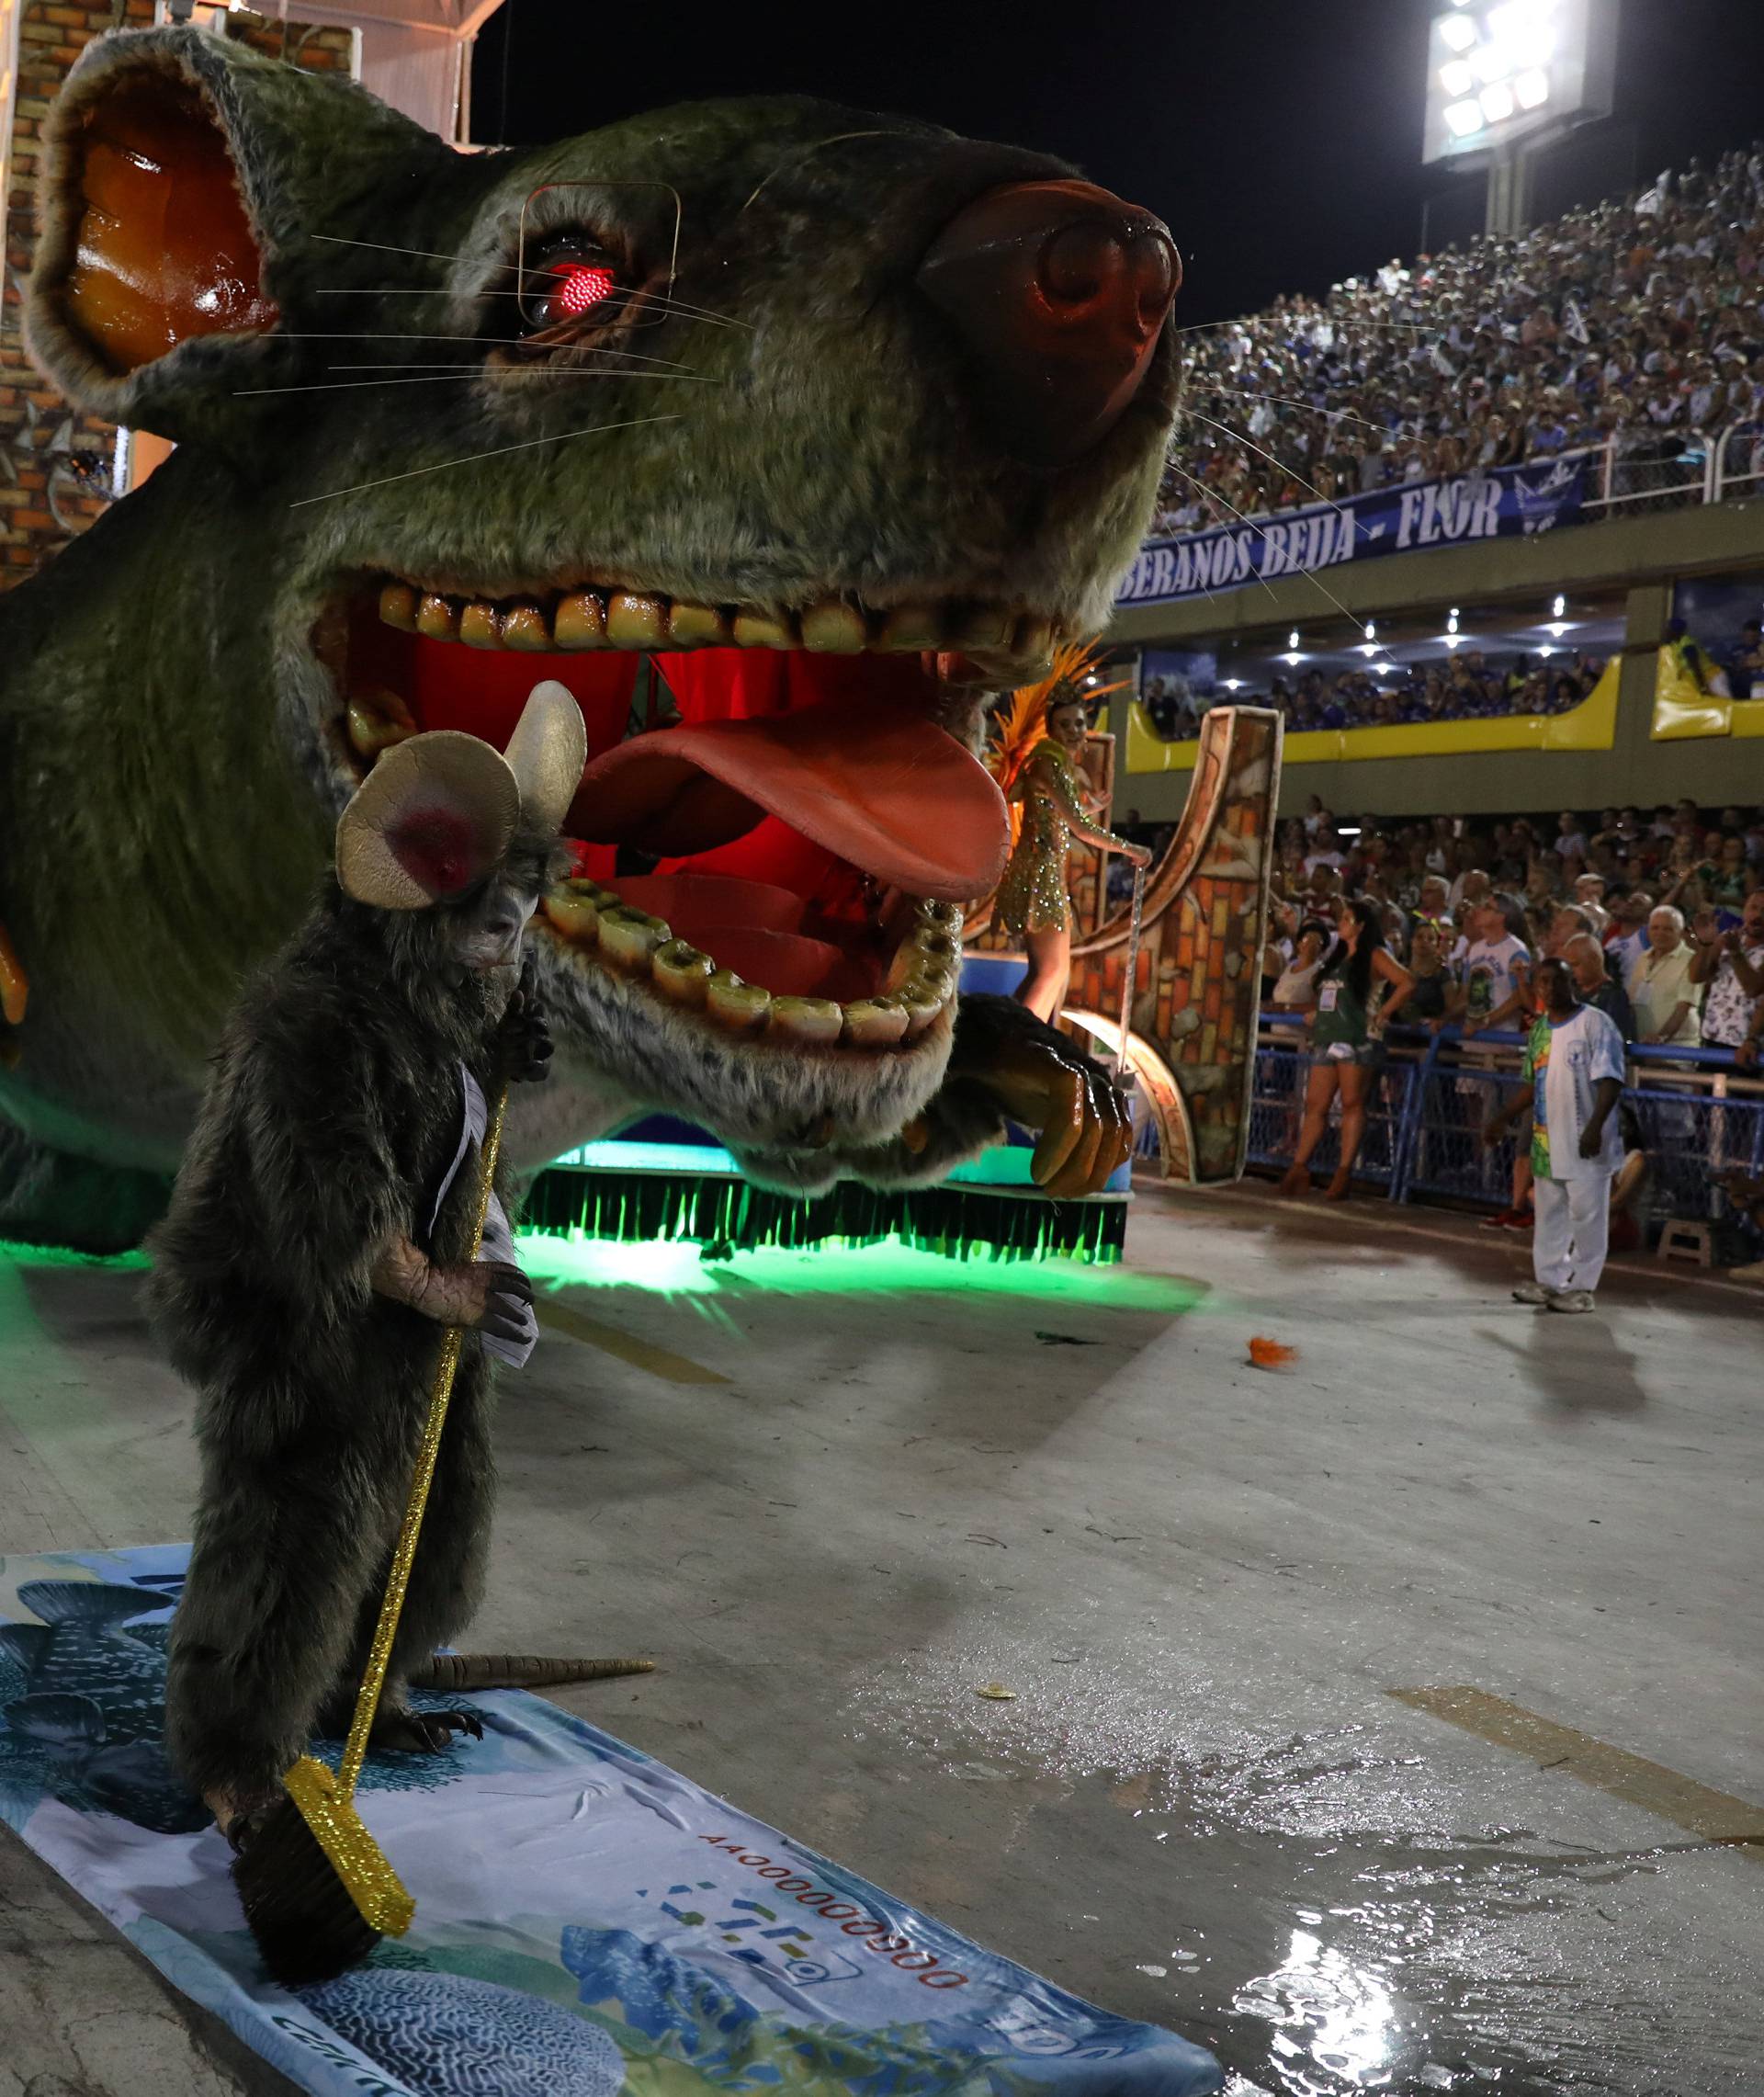 Revellers from Beija-Flor samba school perform during the second night of the Carnival parade at the Sambadrome in Rio de Janeiro